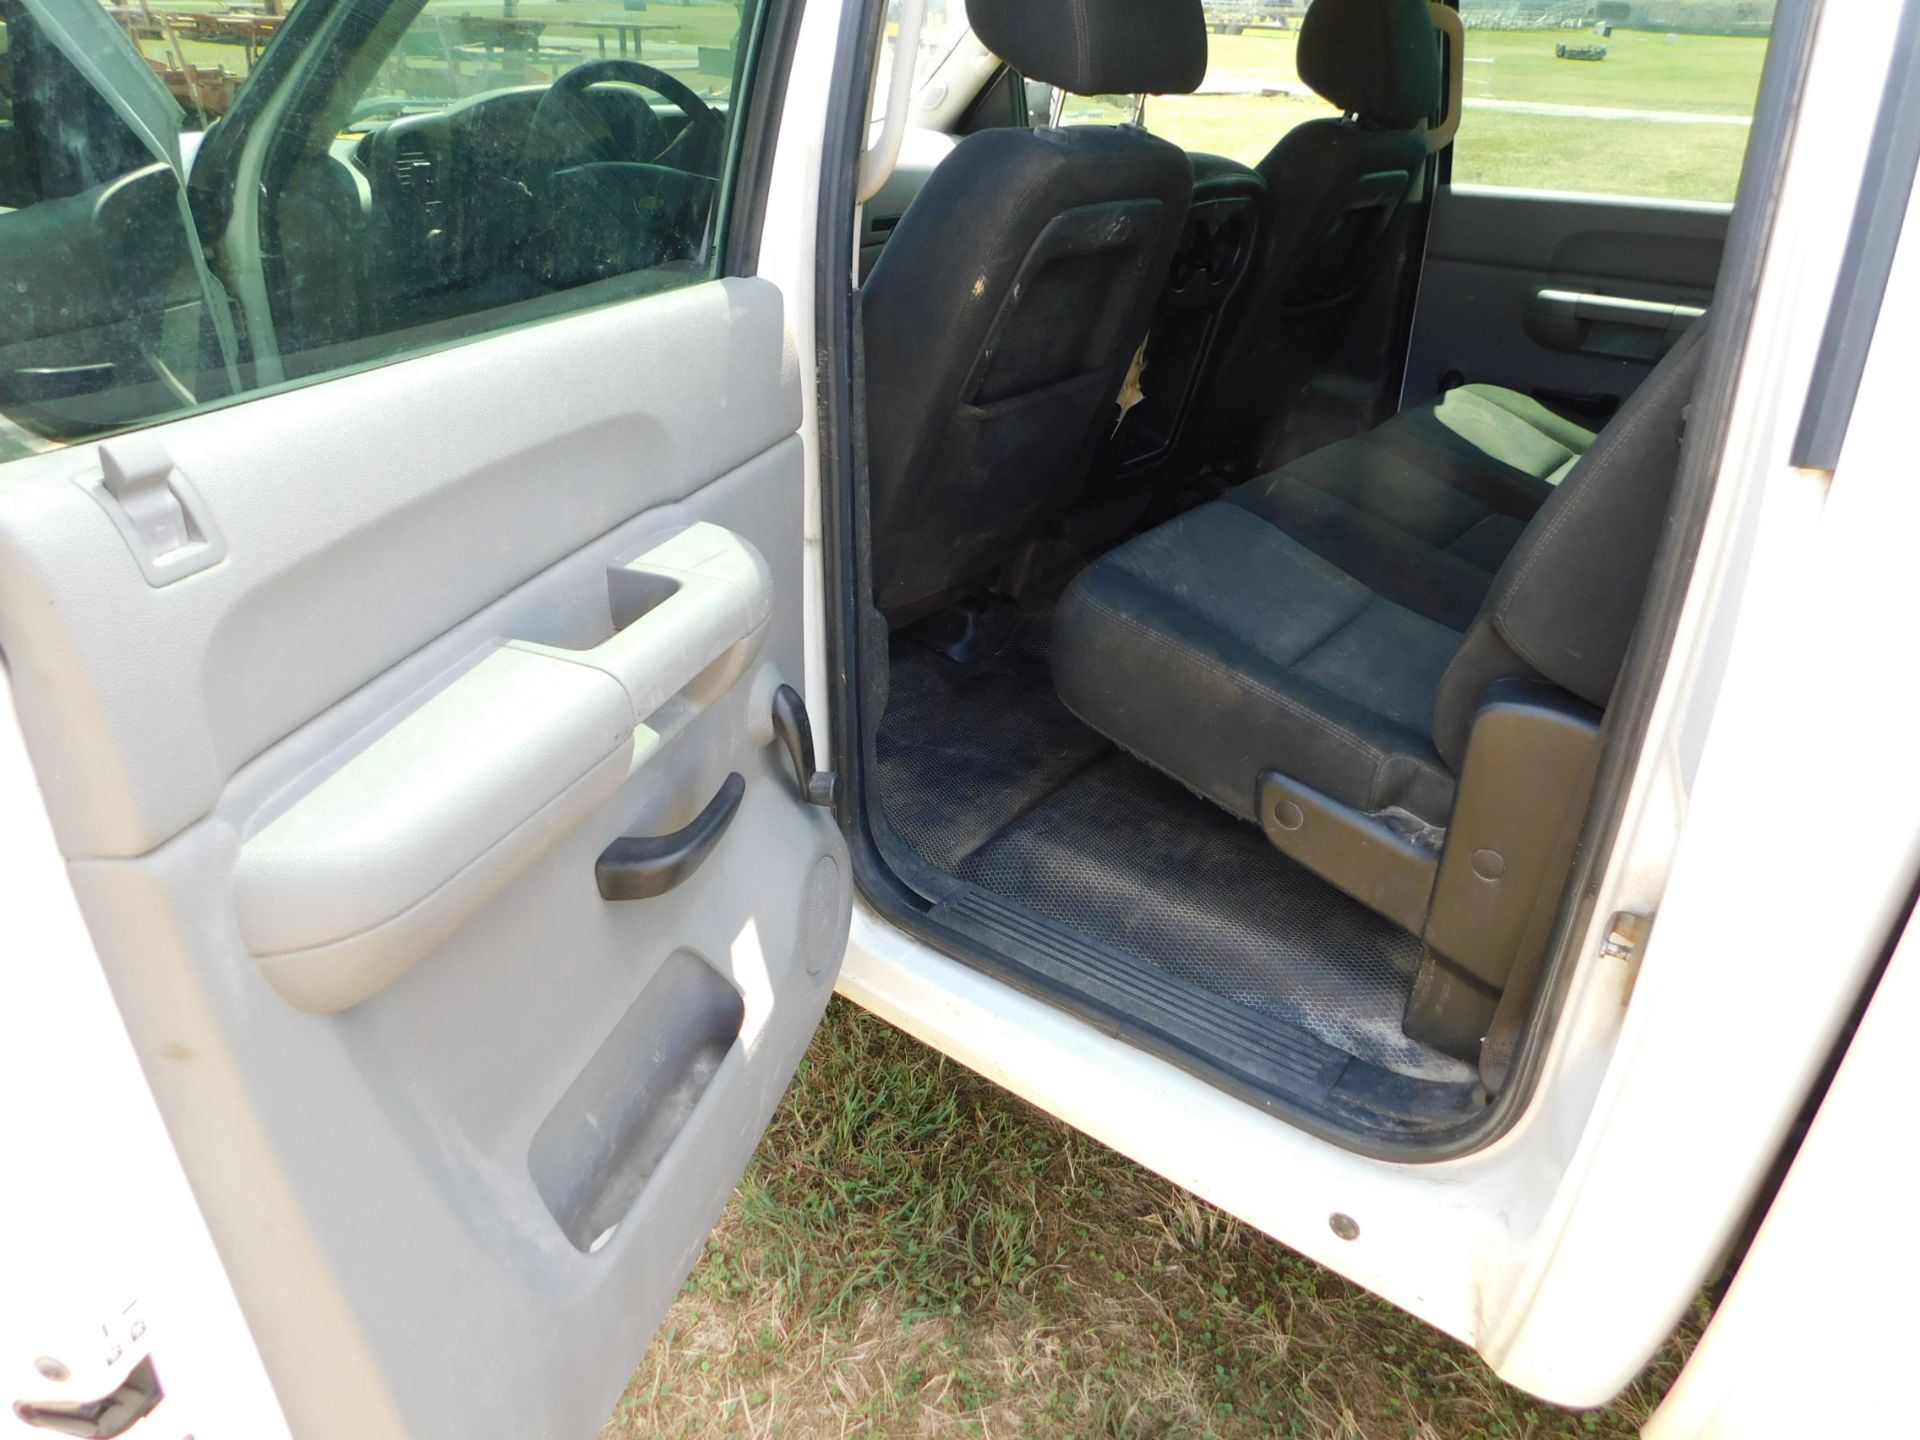 2011 Chevy 2500 Silverado Pickup, Crew Cab, 6' Bed, Automatic, AM/FM, 4WD, AC, PL, Aluminum Tool - Image 34 of 50